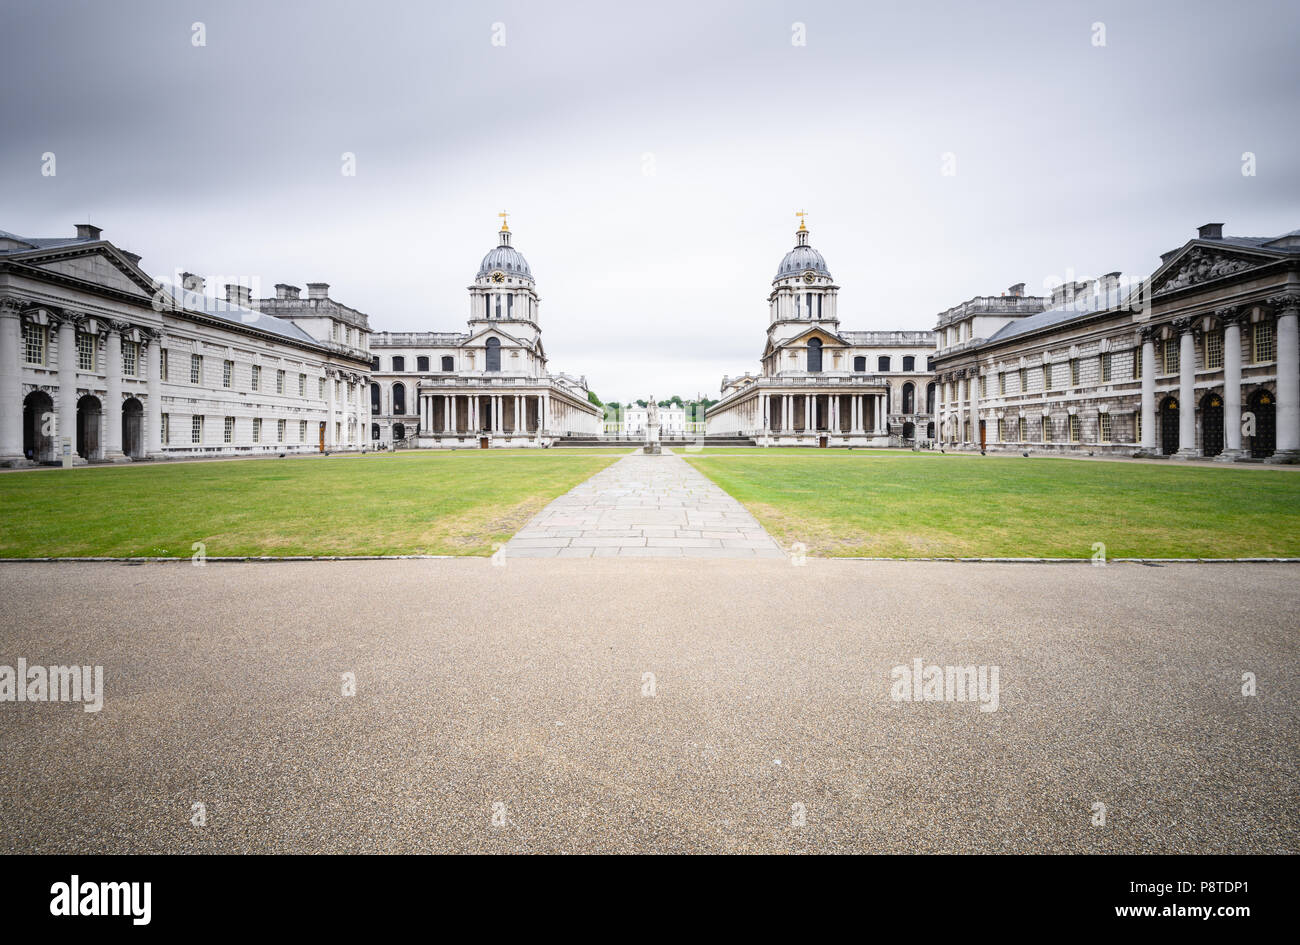 Long exposure wide angle view of the Greenwich Royal Observatory, London Stock Photo